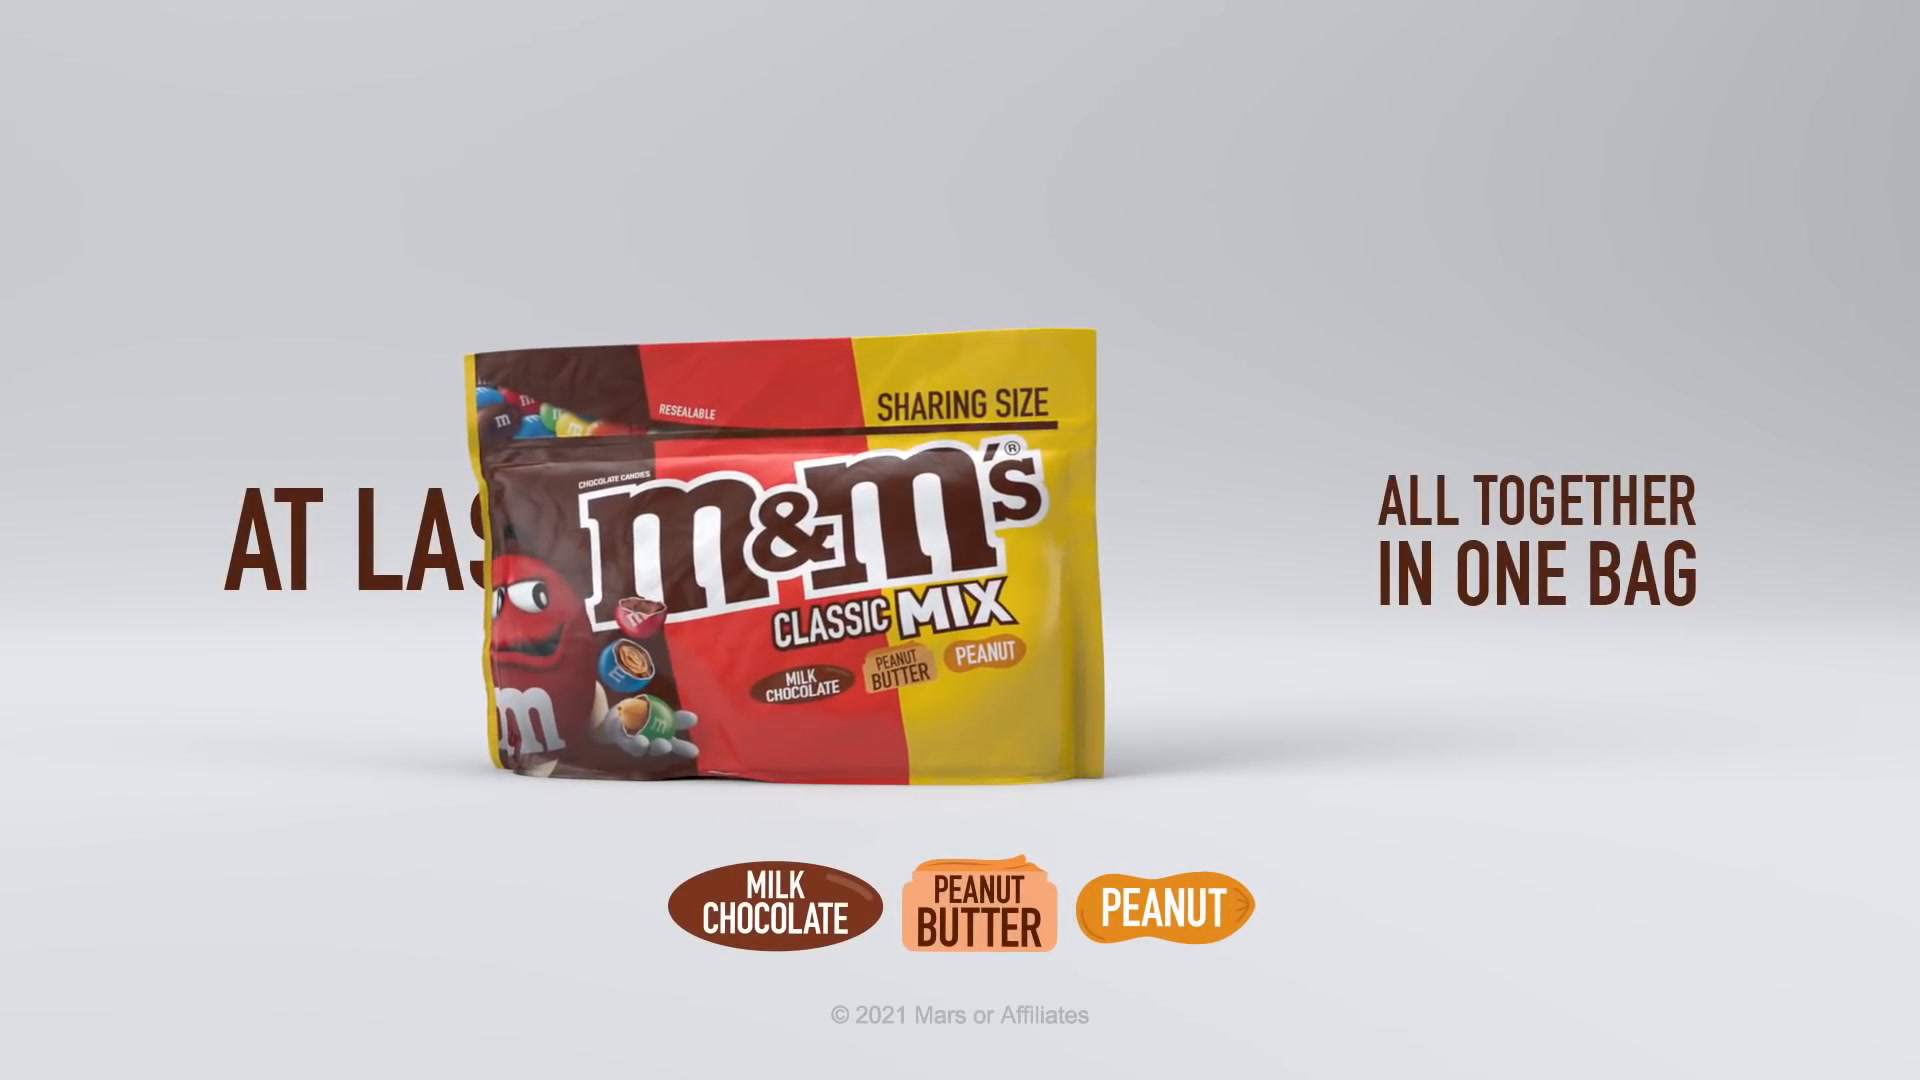 M&M's, Advertising Profile, See Their Ad Spend!